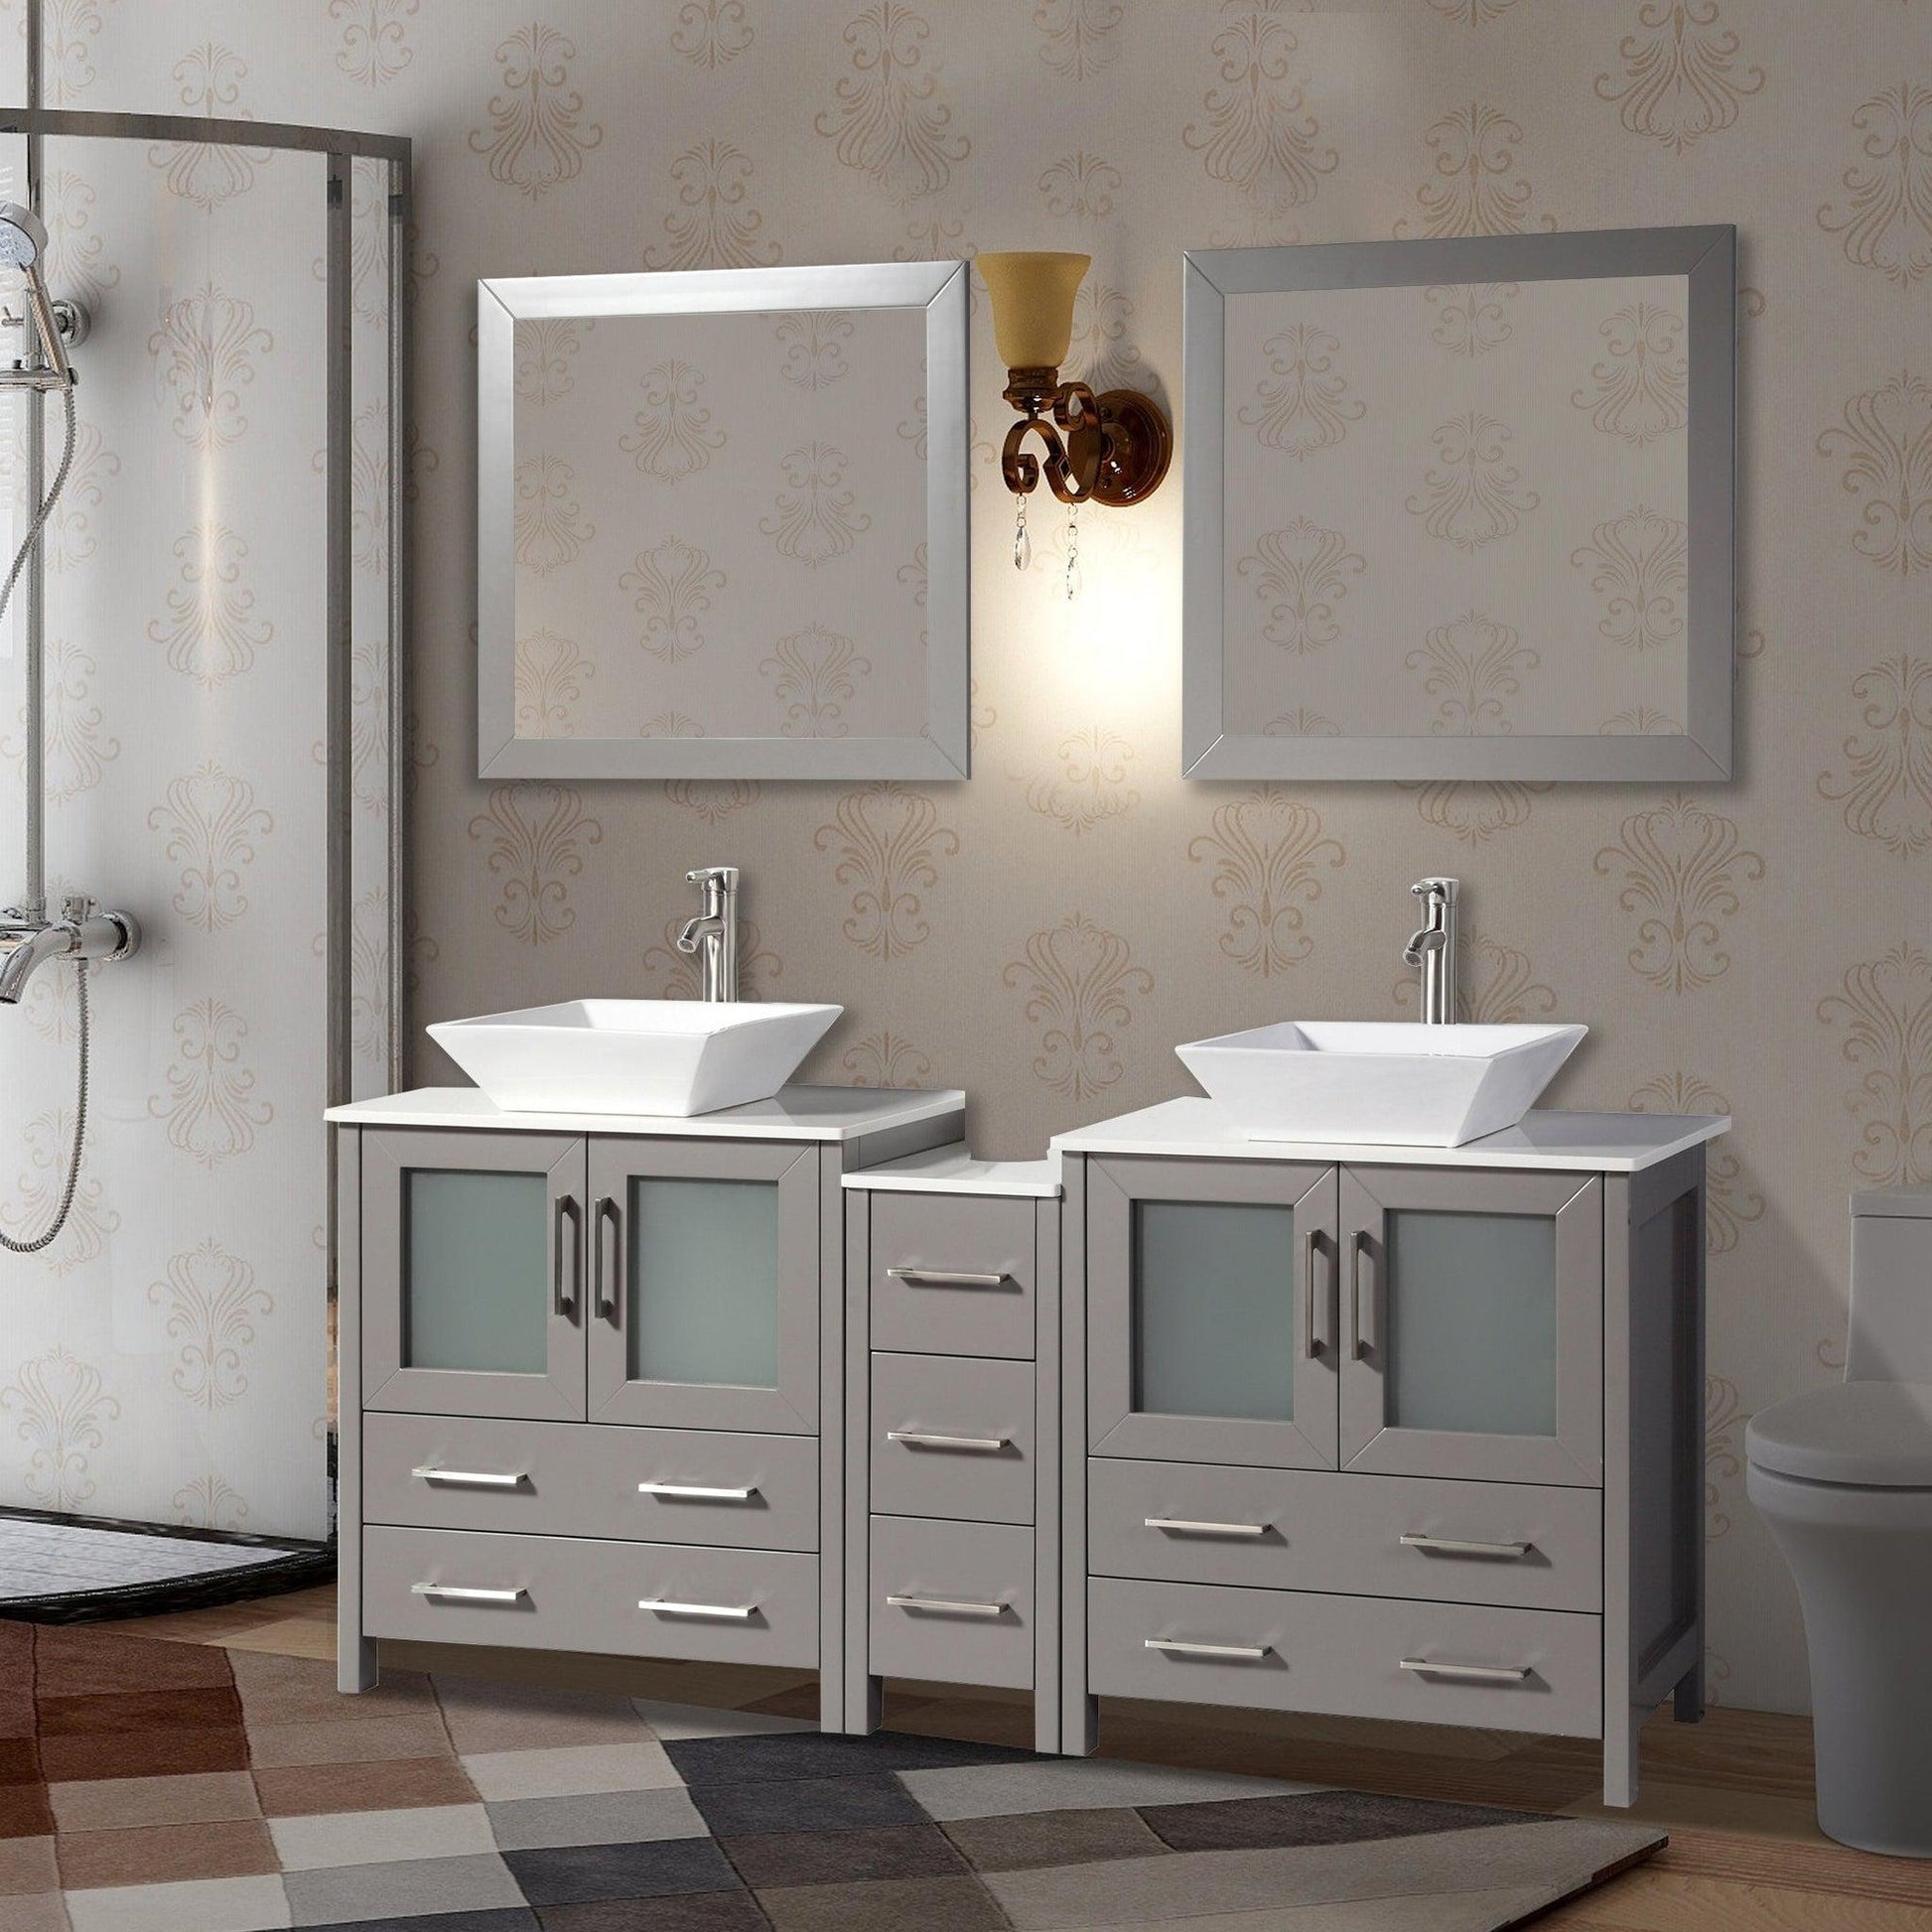 Vanity Art Ravenna 72" Double Gray Freestanding Vanity Set With White Engineered Marble Top, Ceramic Vessel Sink, 1 Side Cabinet and 2 Mirrors